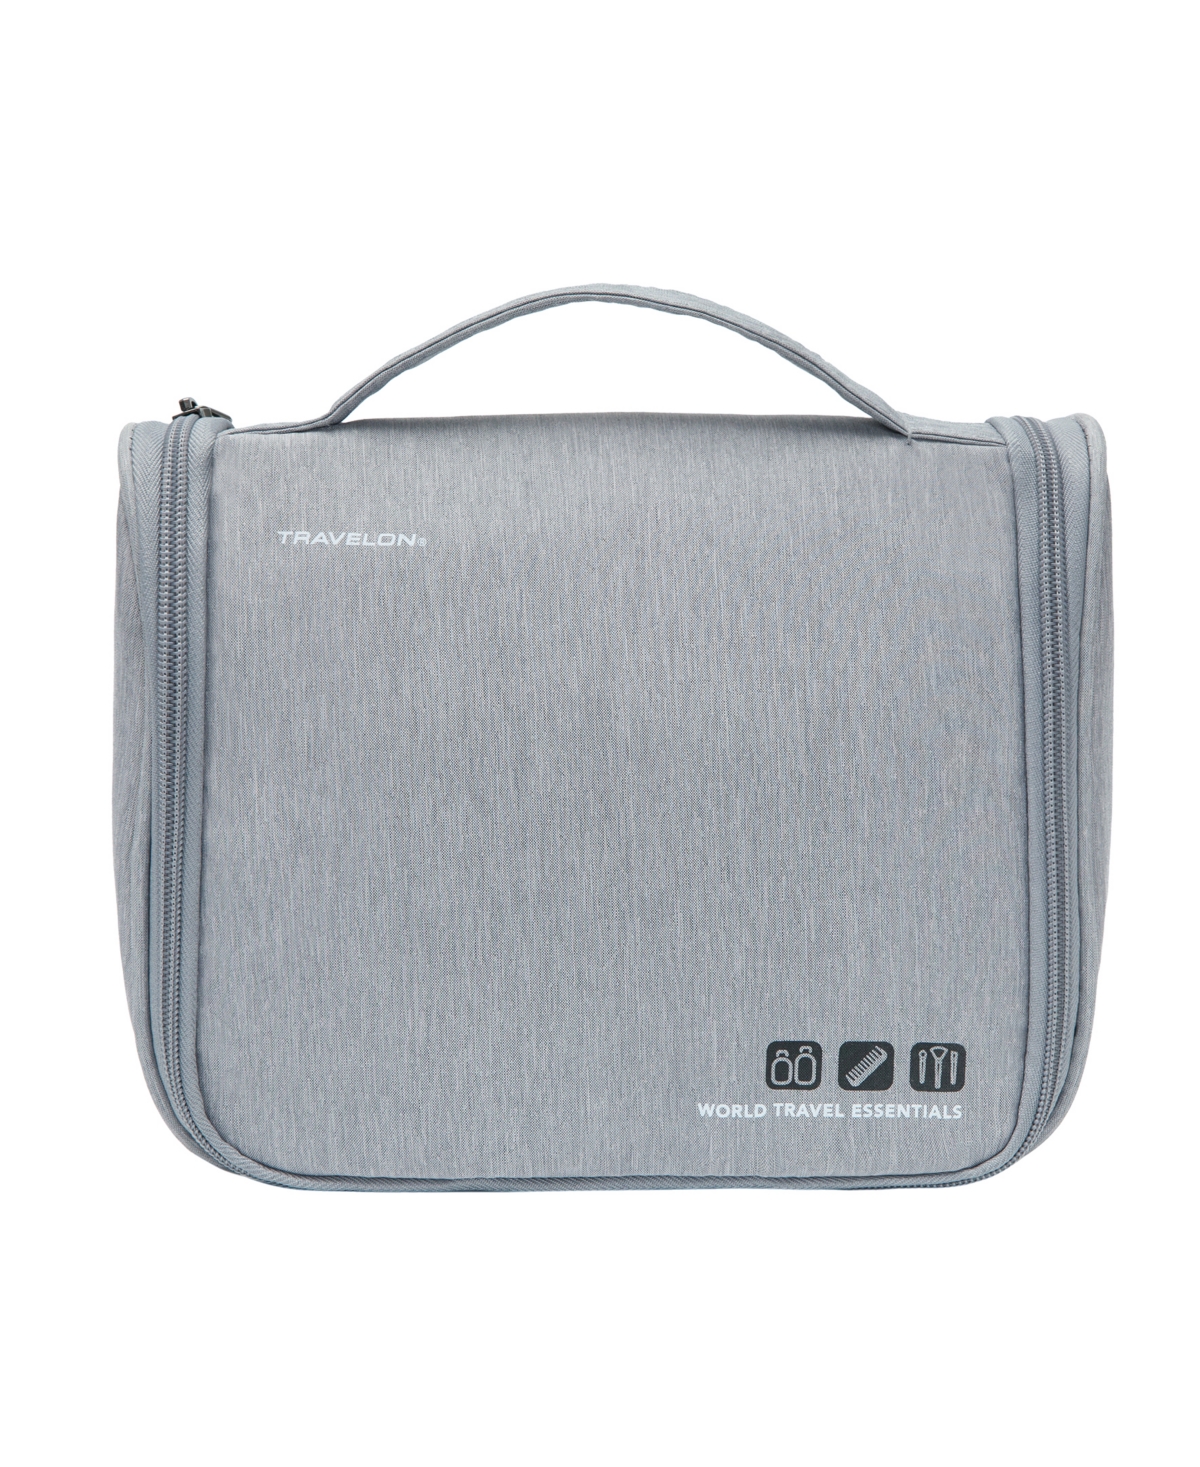 Shop Travelon World Travel Essentials Hanging Toiletry Case In Peacock Te